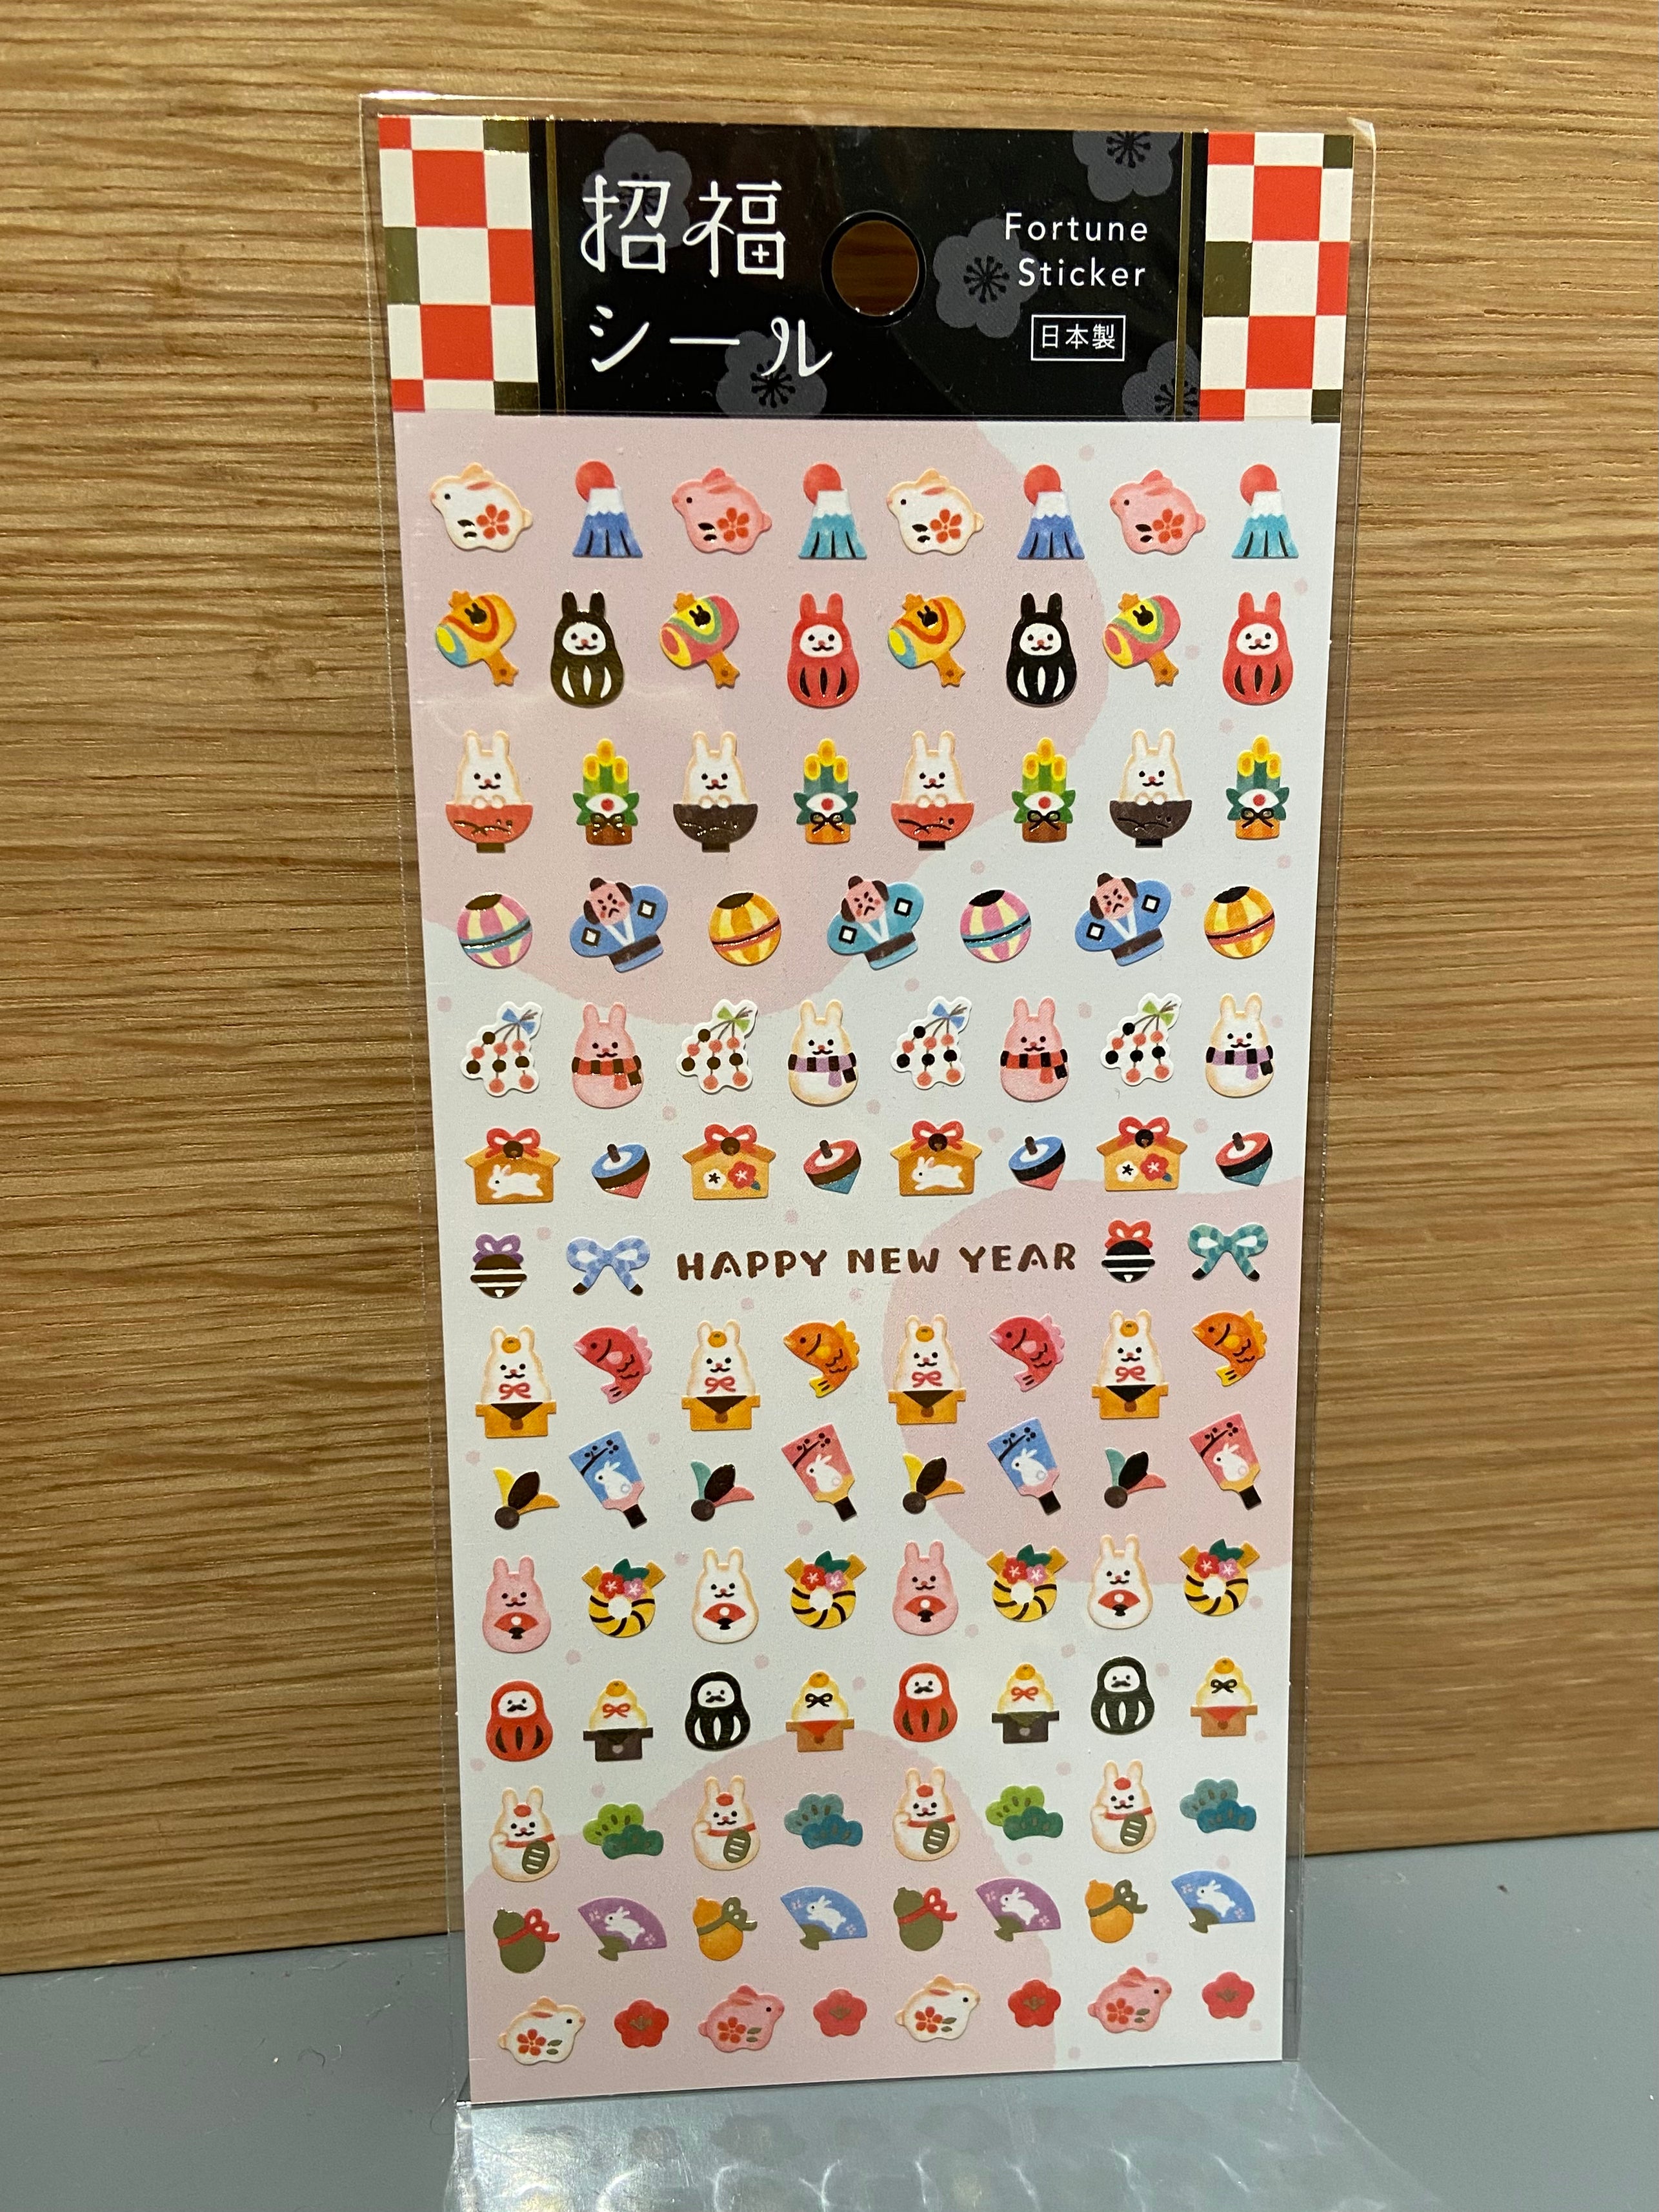 Stickers, small figures